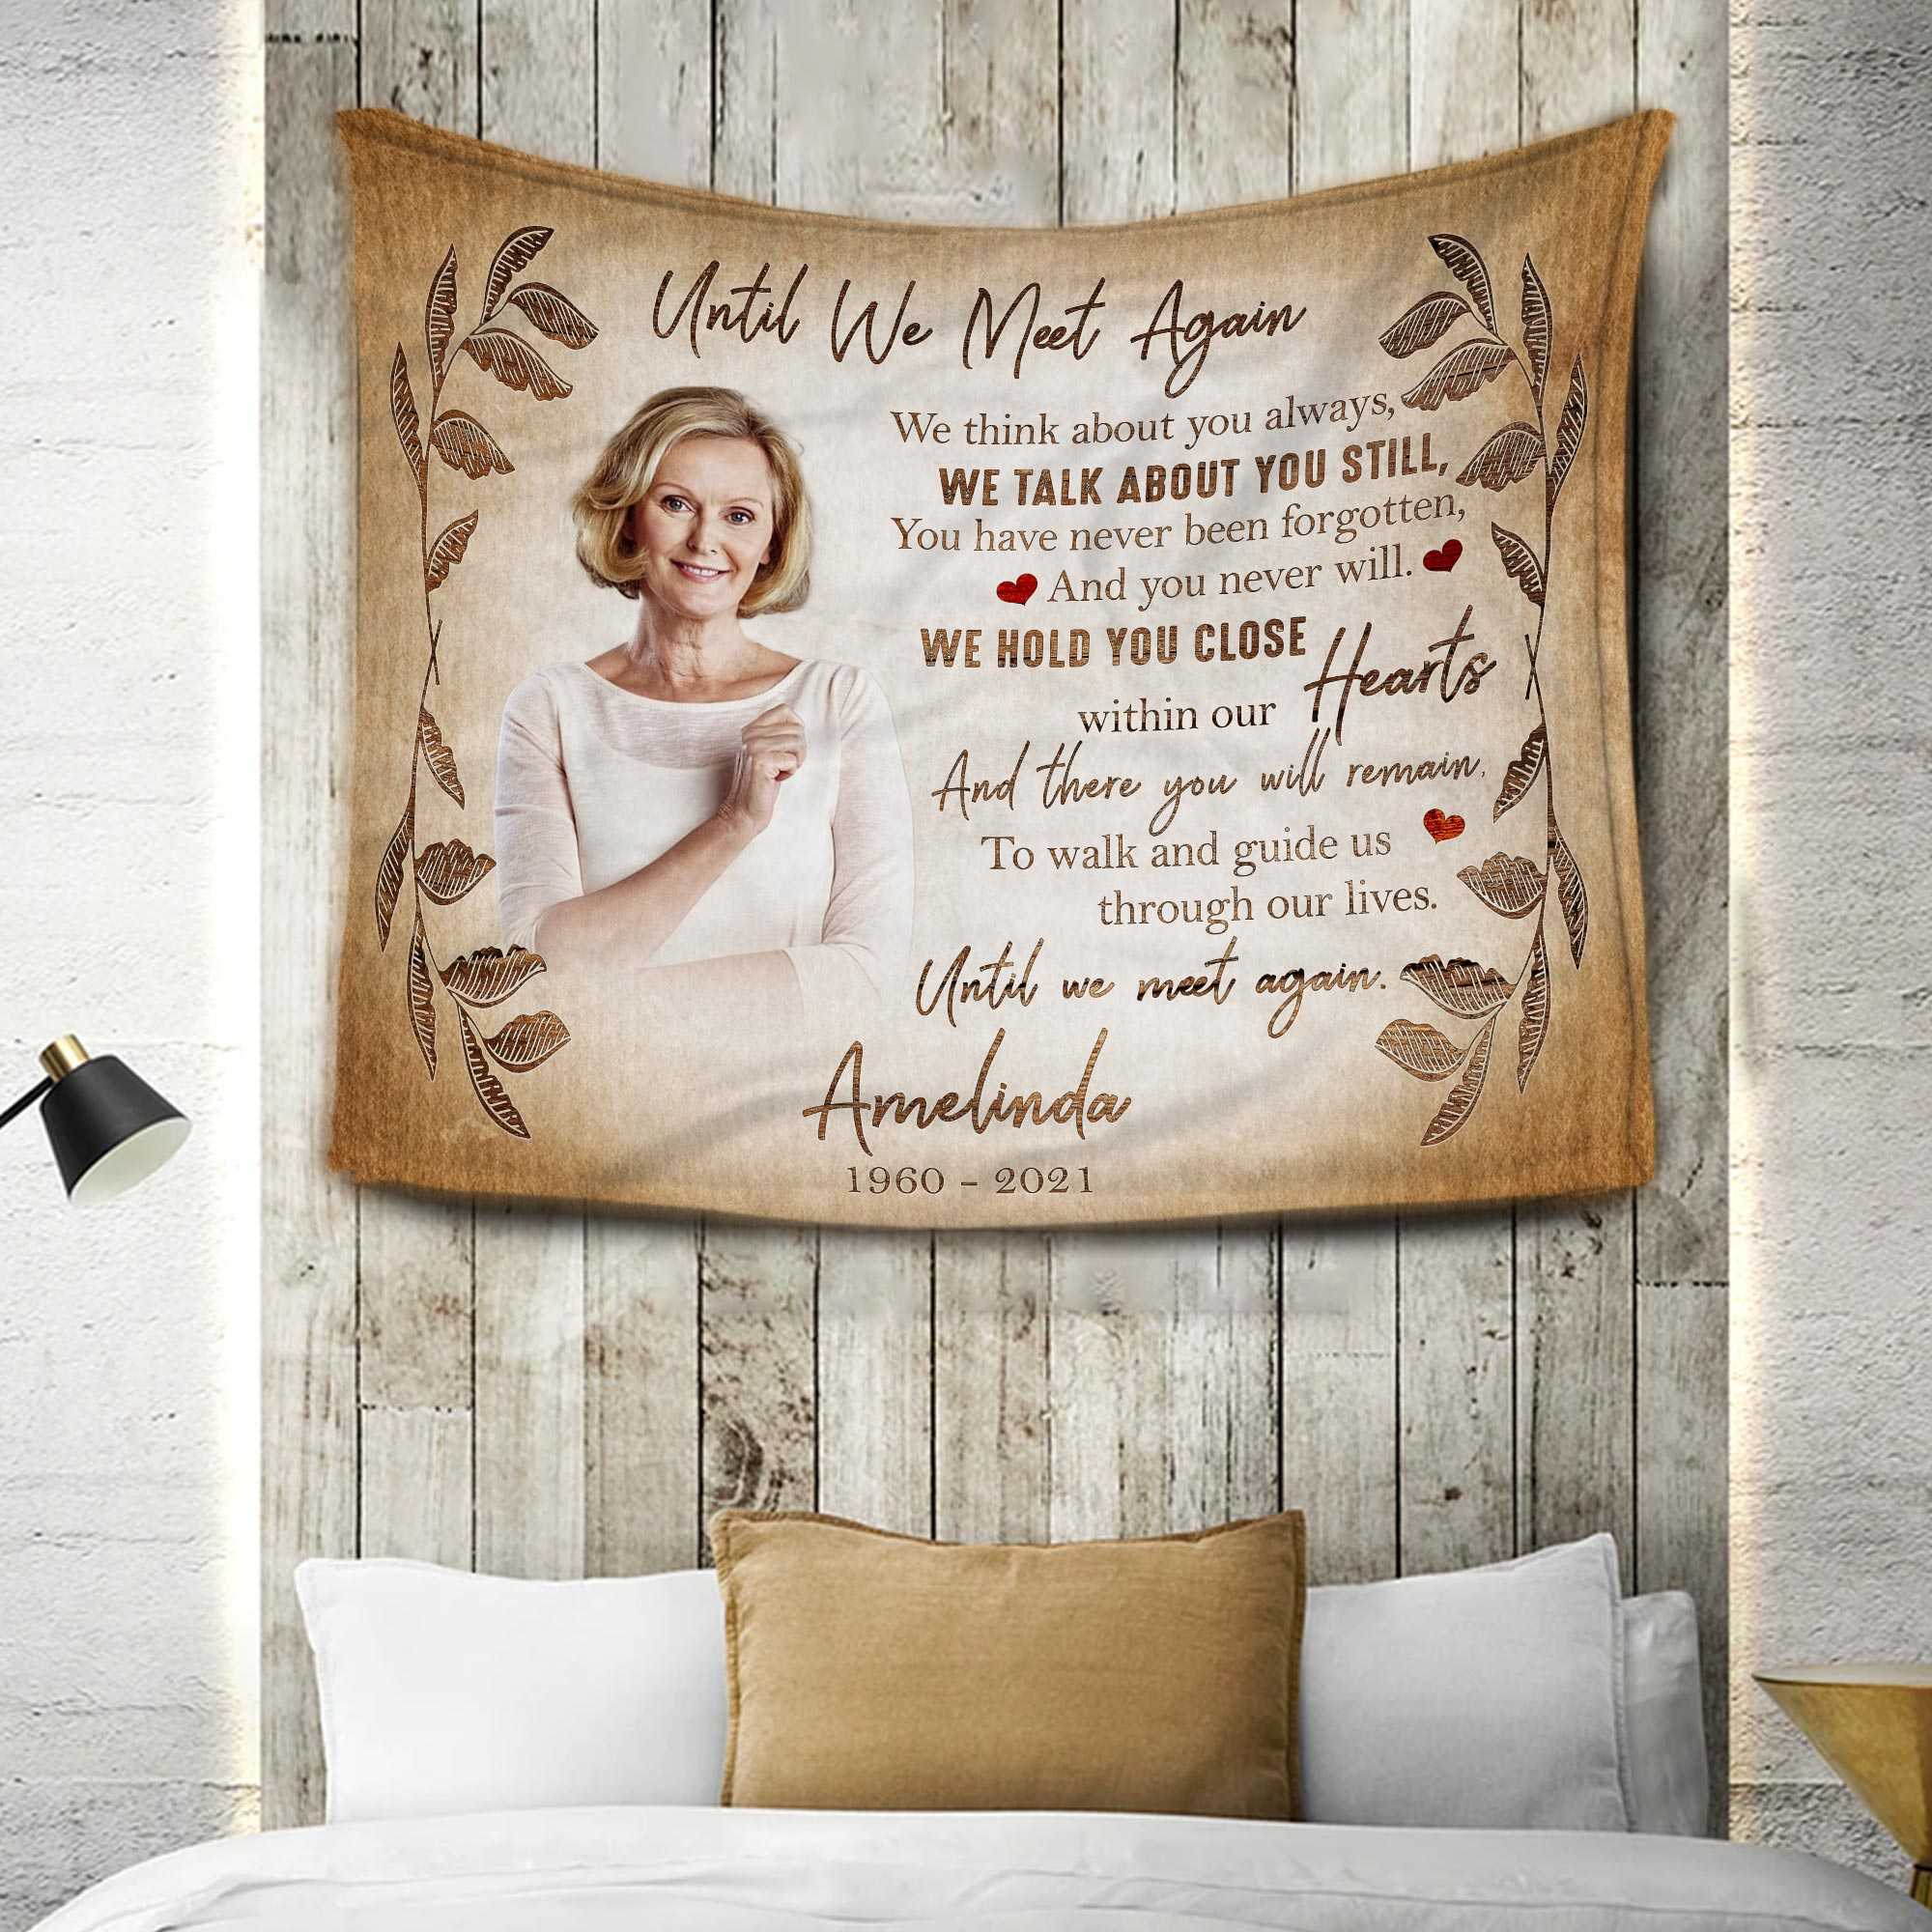 Memorial Blankets With Pictures For Loss Of Mother, In Loving Memory Blankets, Sympathy Throw Blankets Mothers Day Gifts